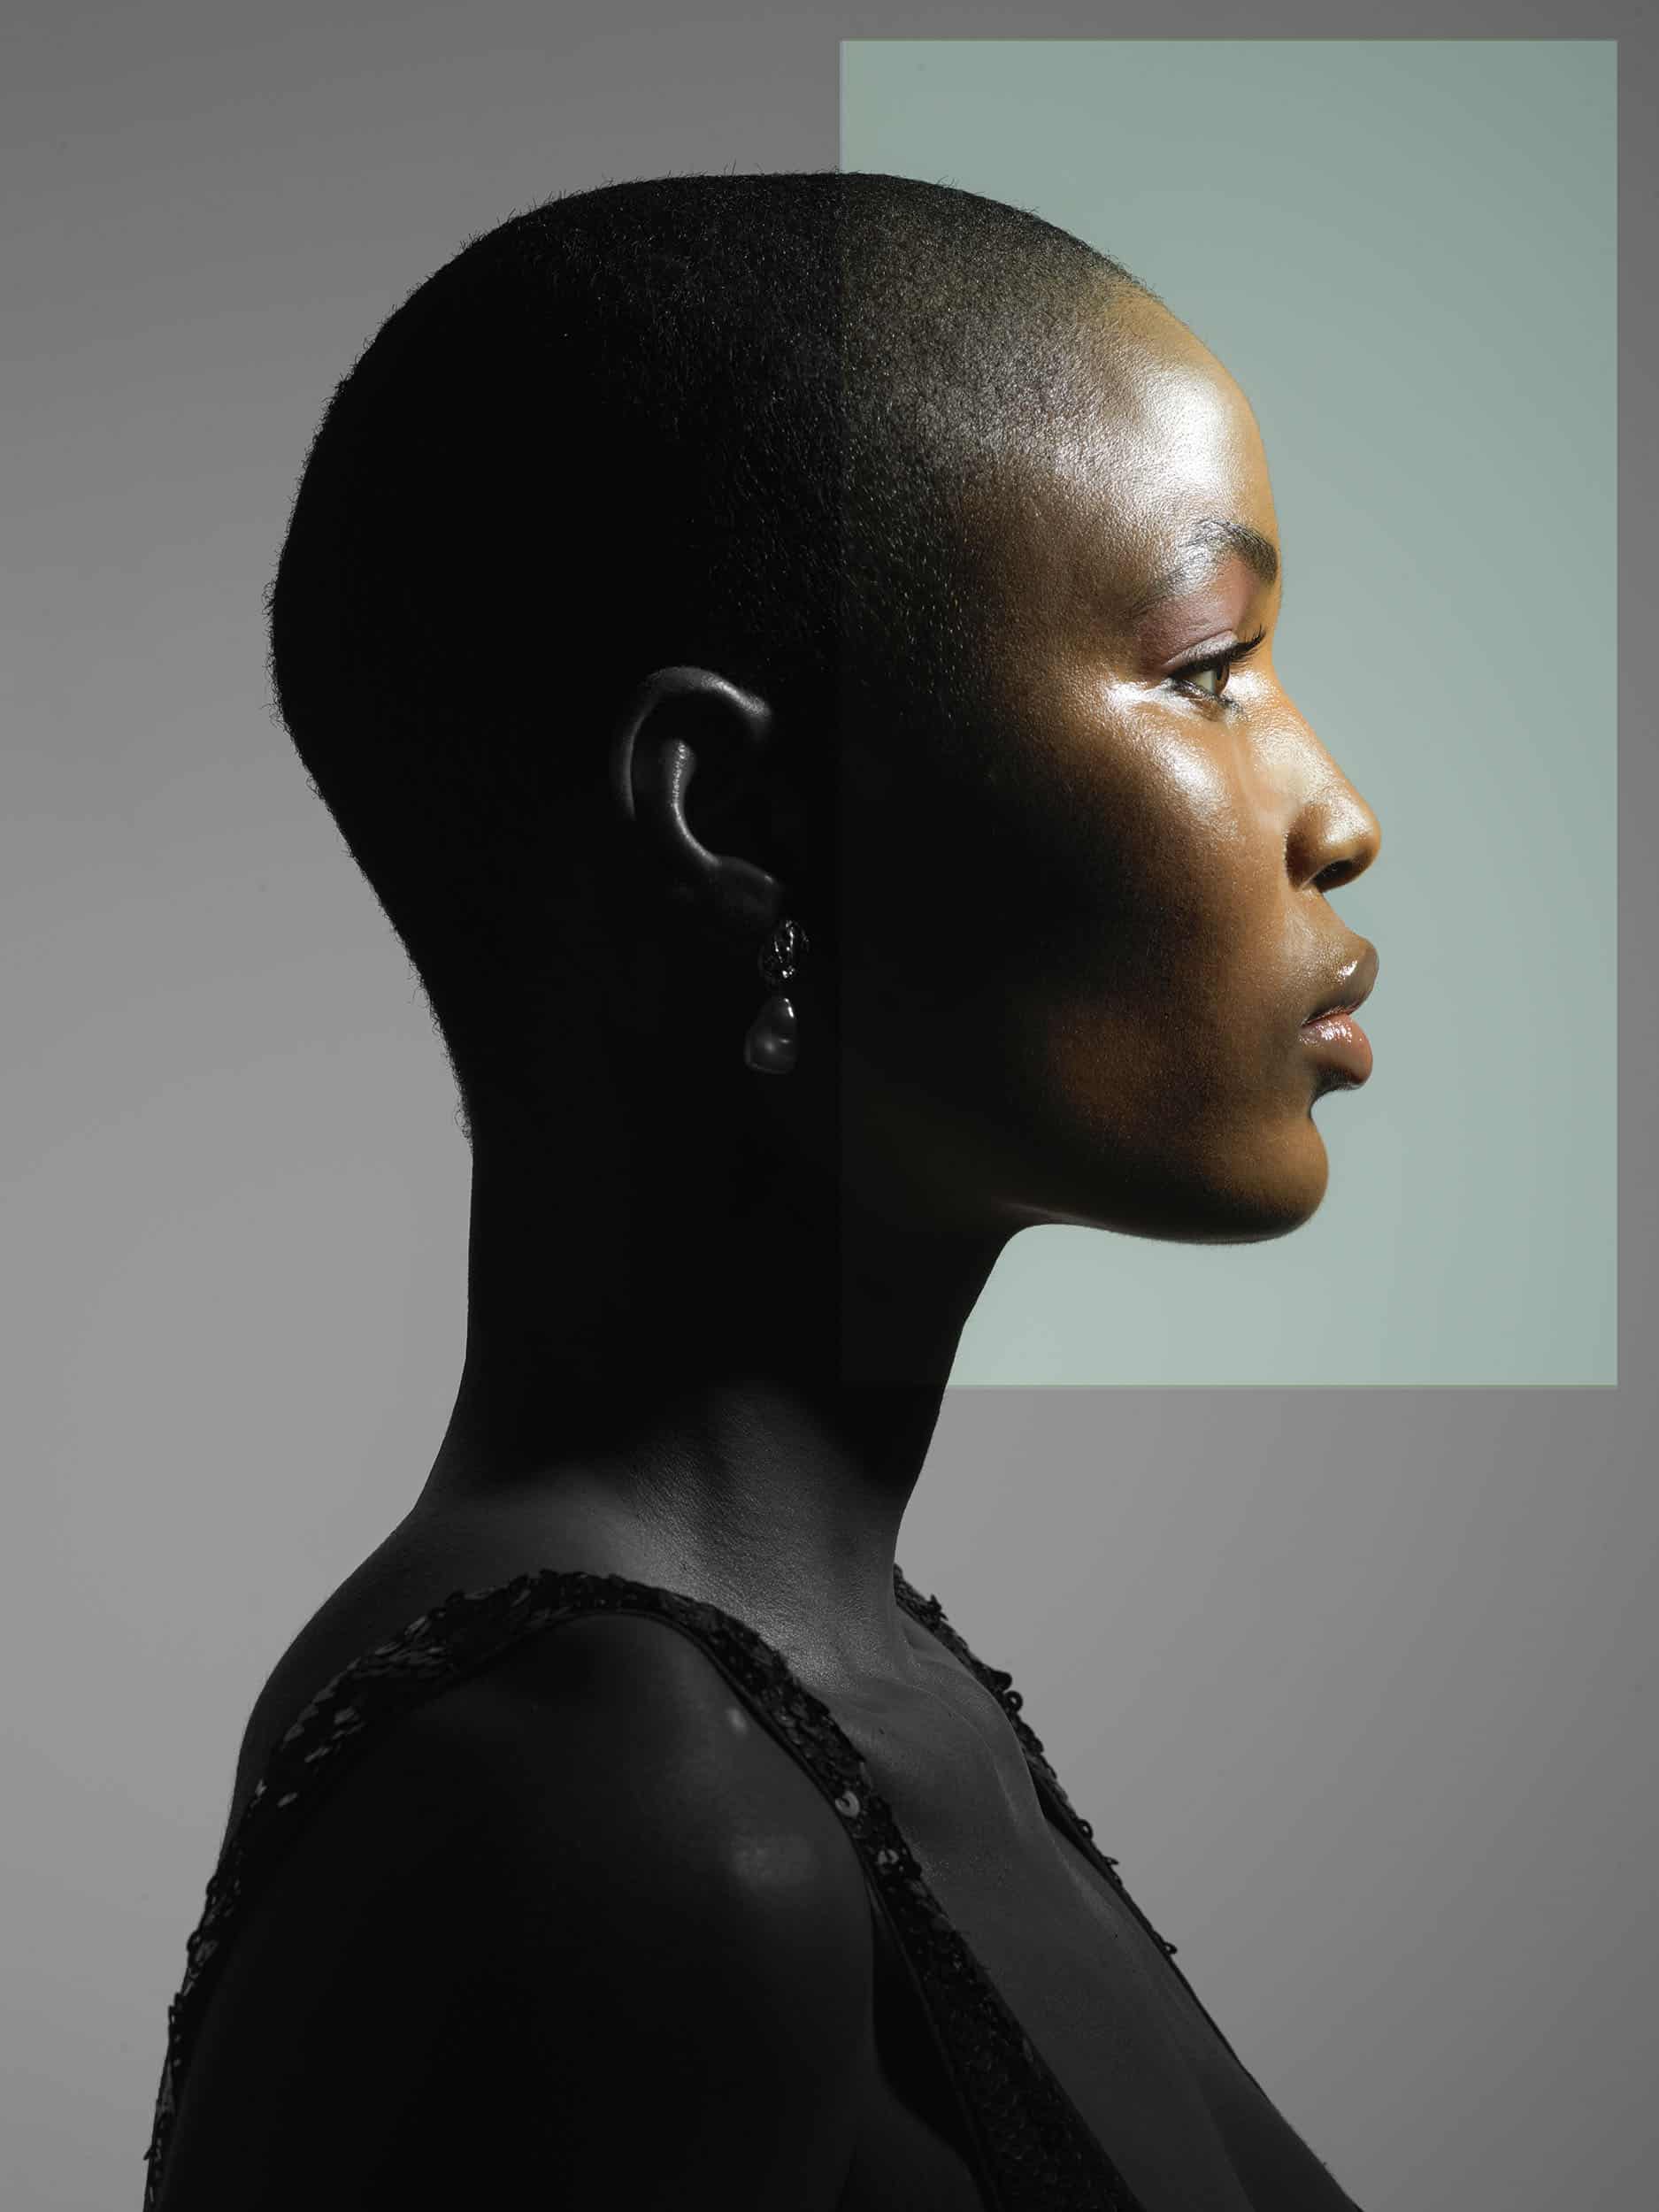 Side profile of a black women with a shaved head, with one half of her face in colour and the other half in black and white